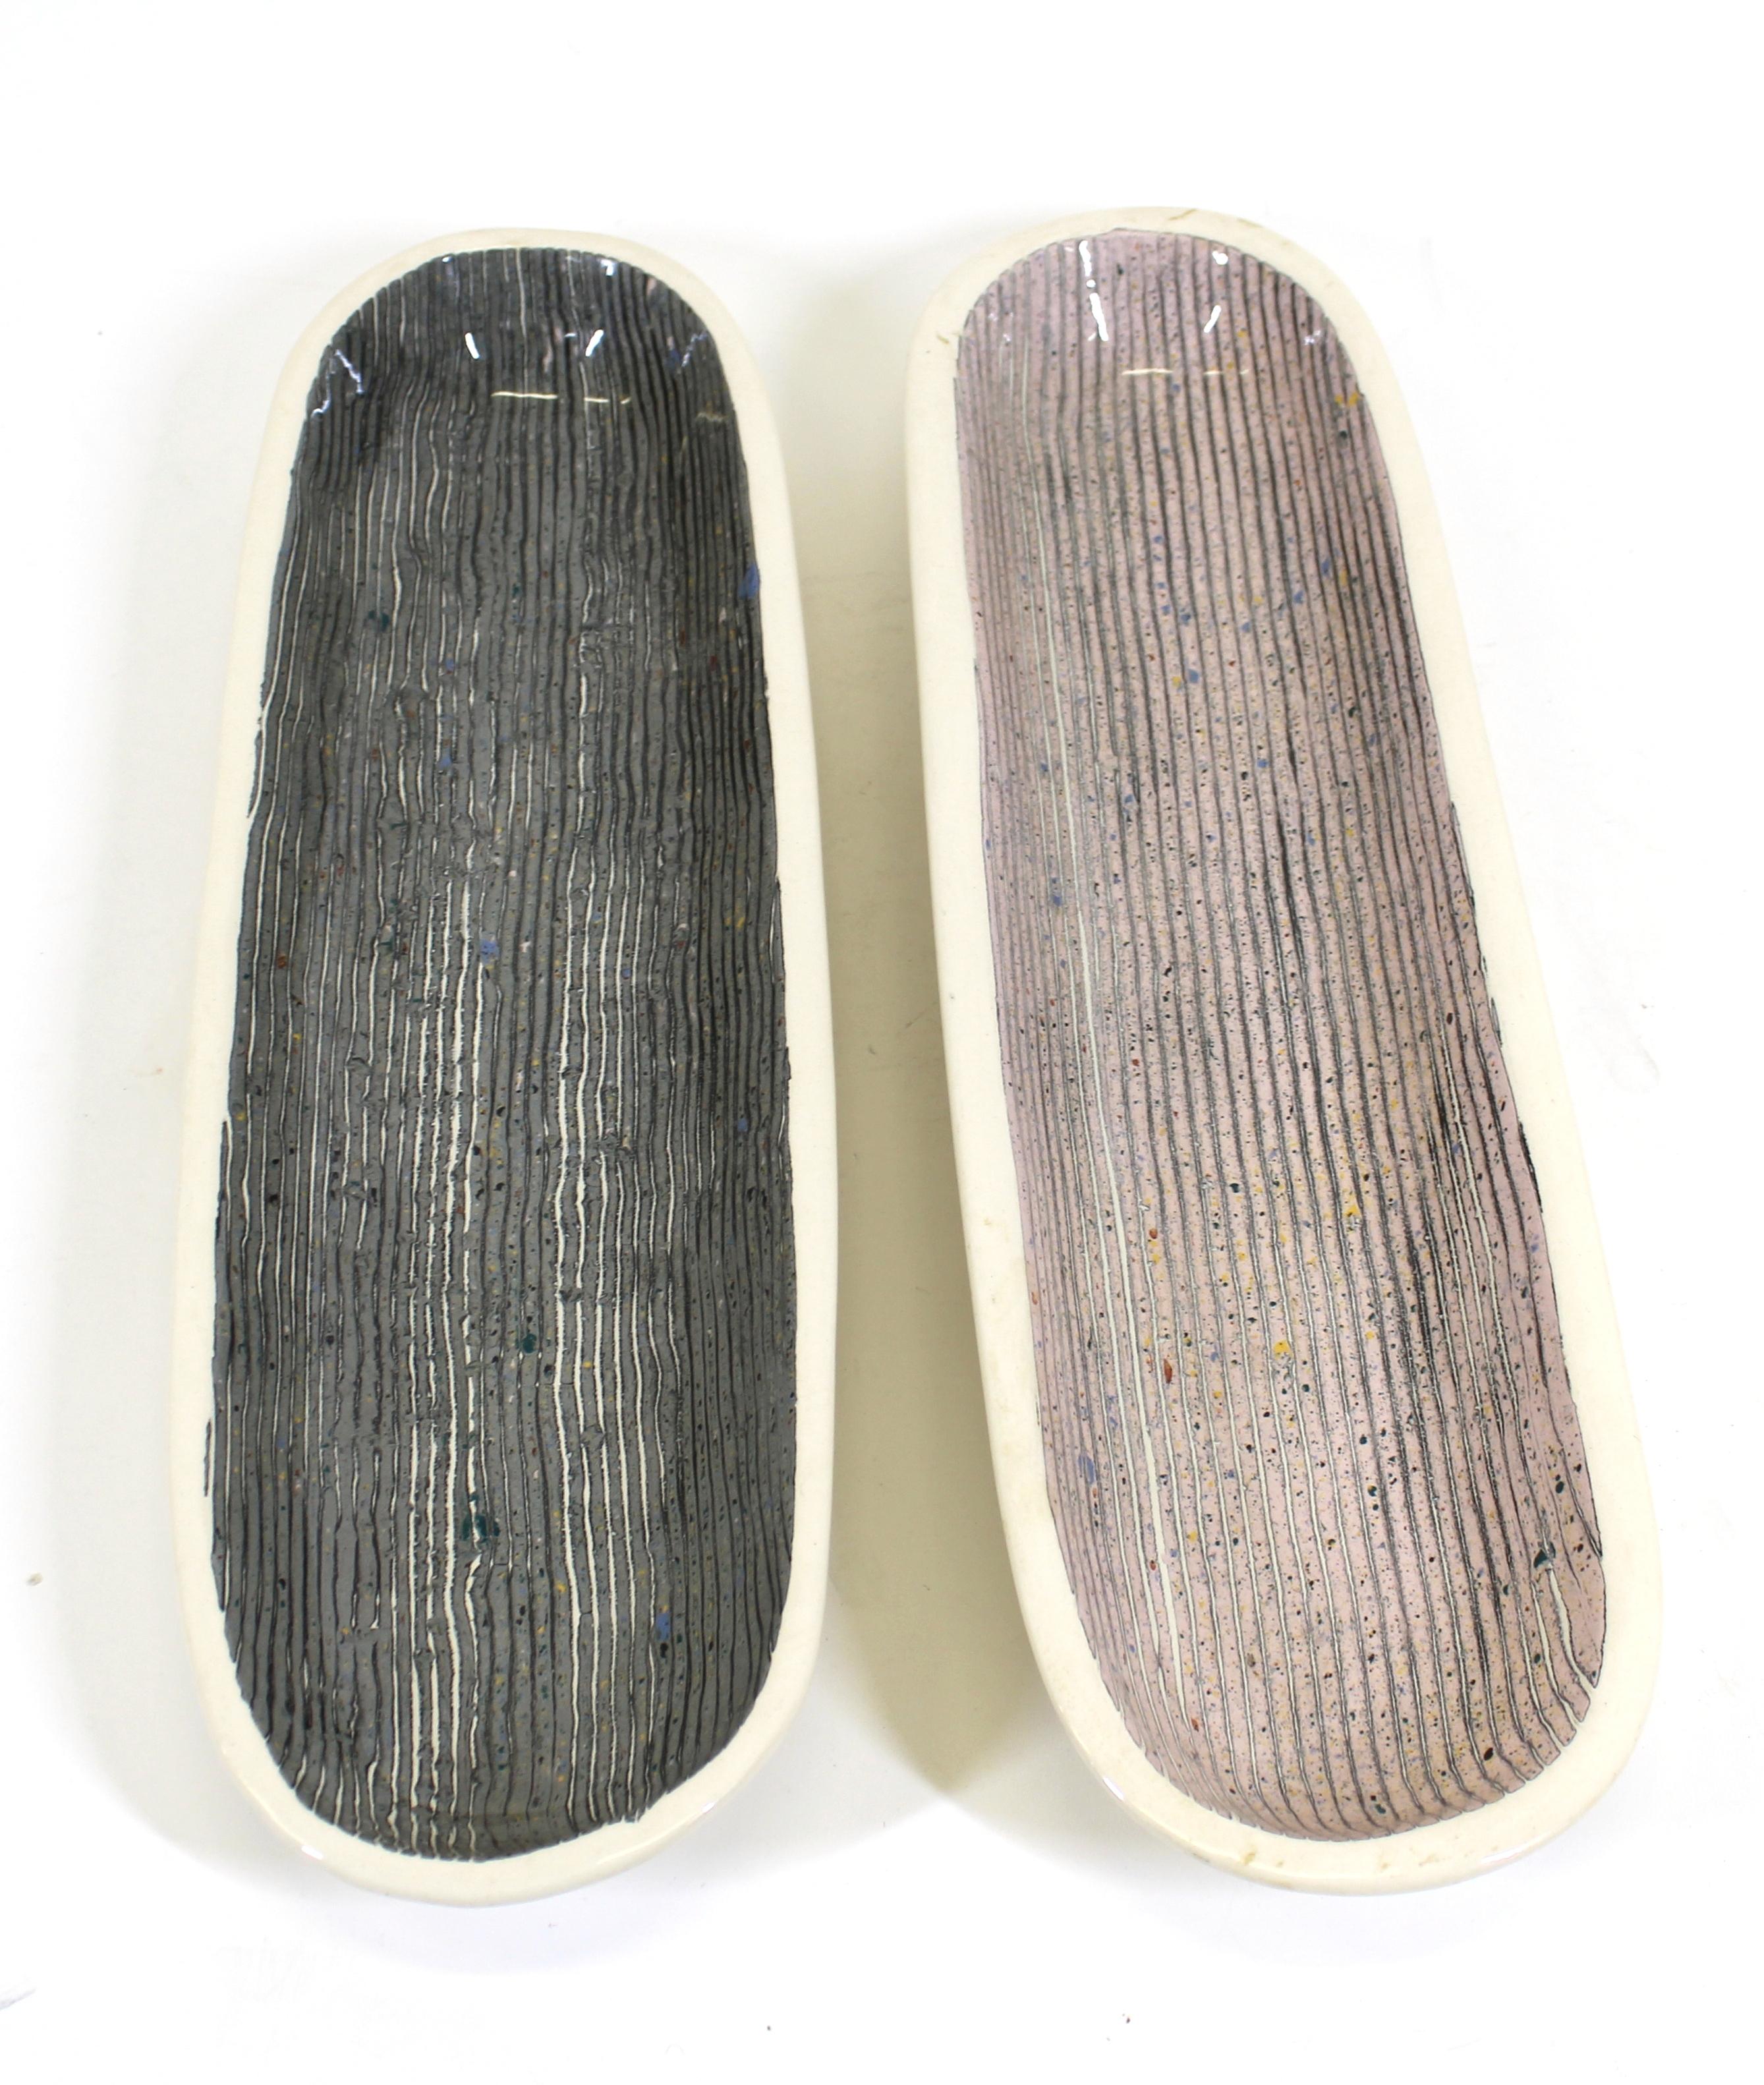 Claudia Reese Postmodern art pottery glazed ceramic elongated pair of vide-poche trays, stamped with makers mark on the side.